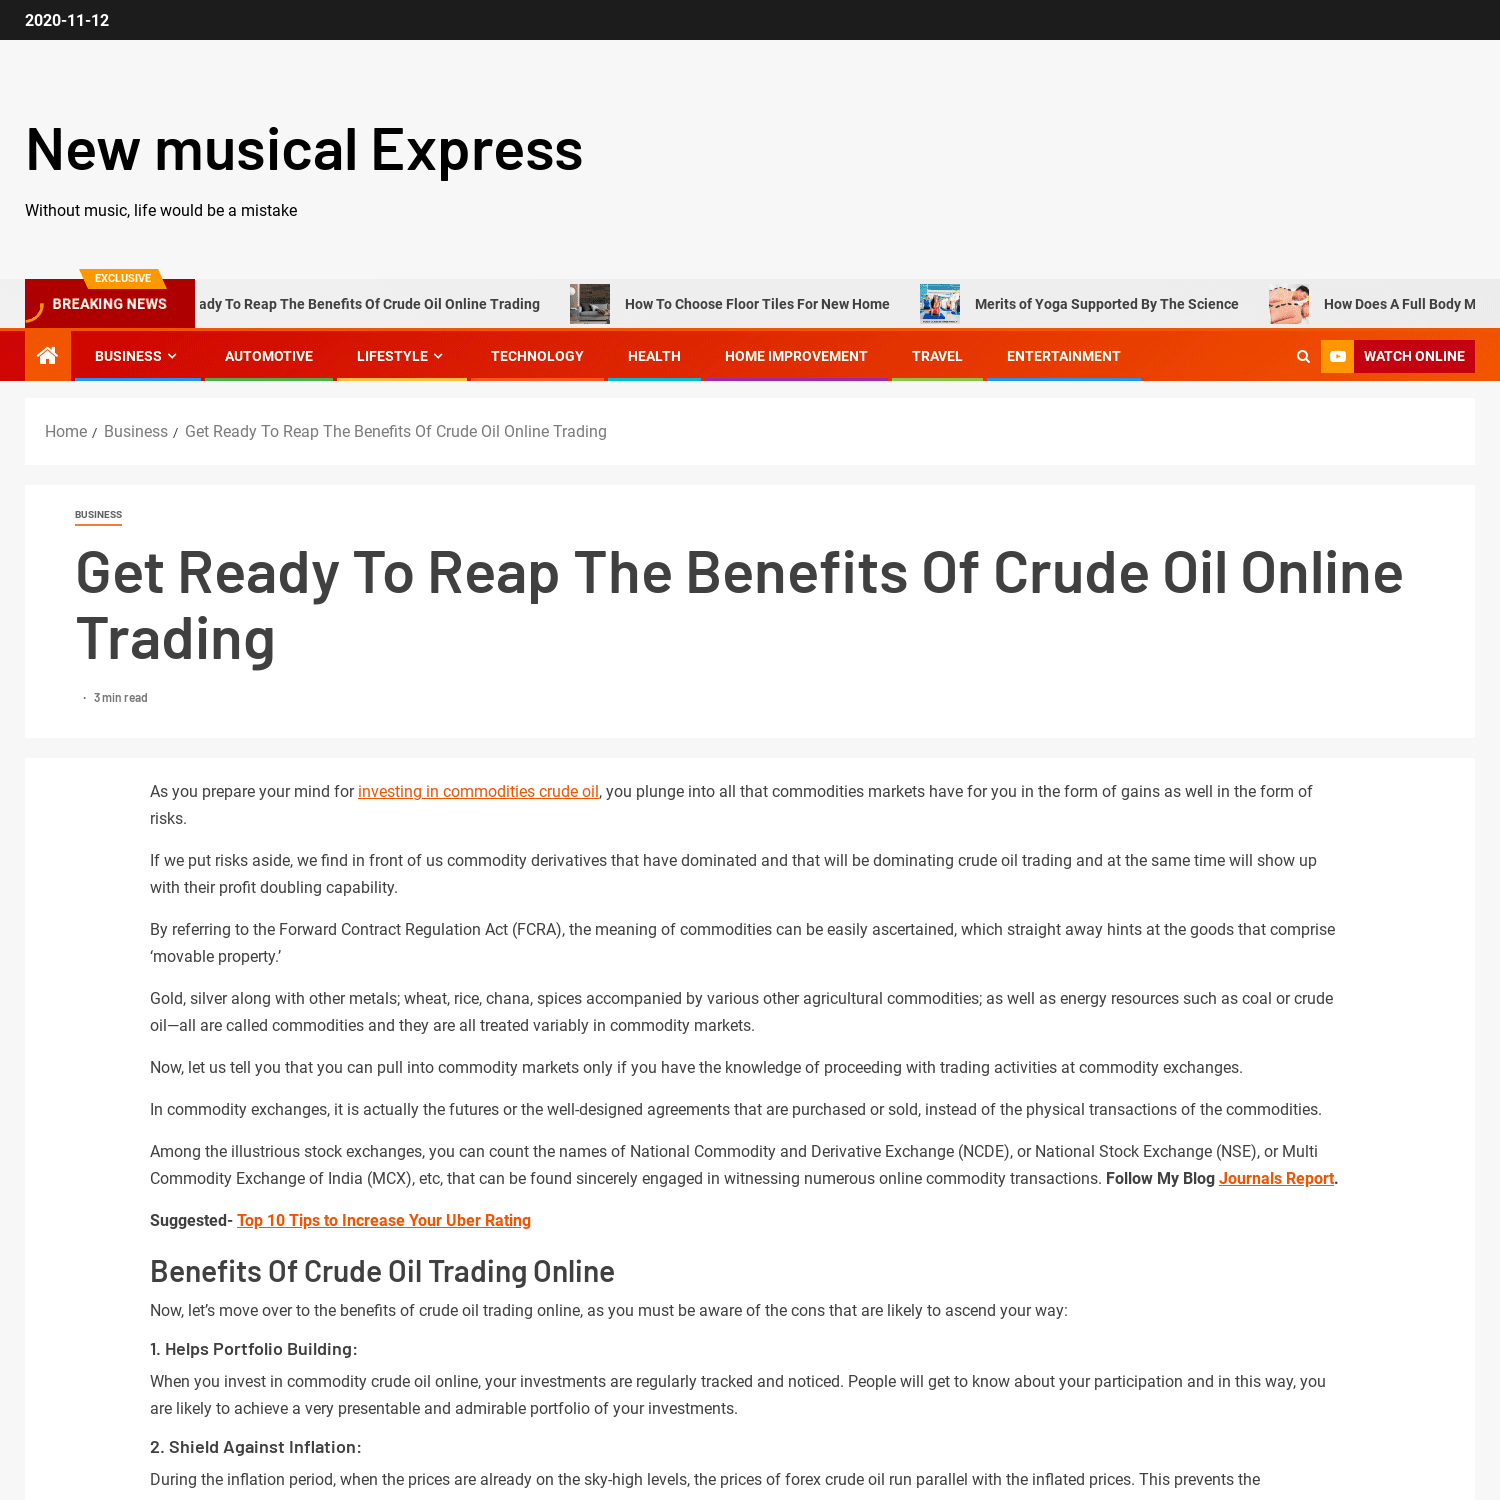 Get Ready To Reap The Benefits Of Crude Oil Online Trading